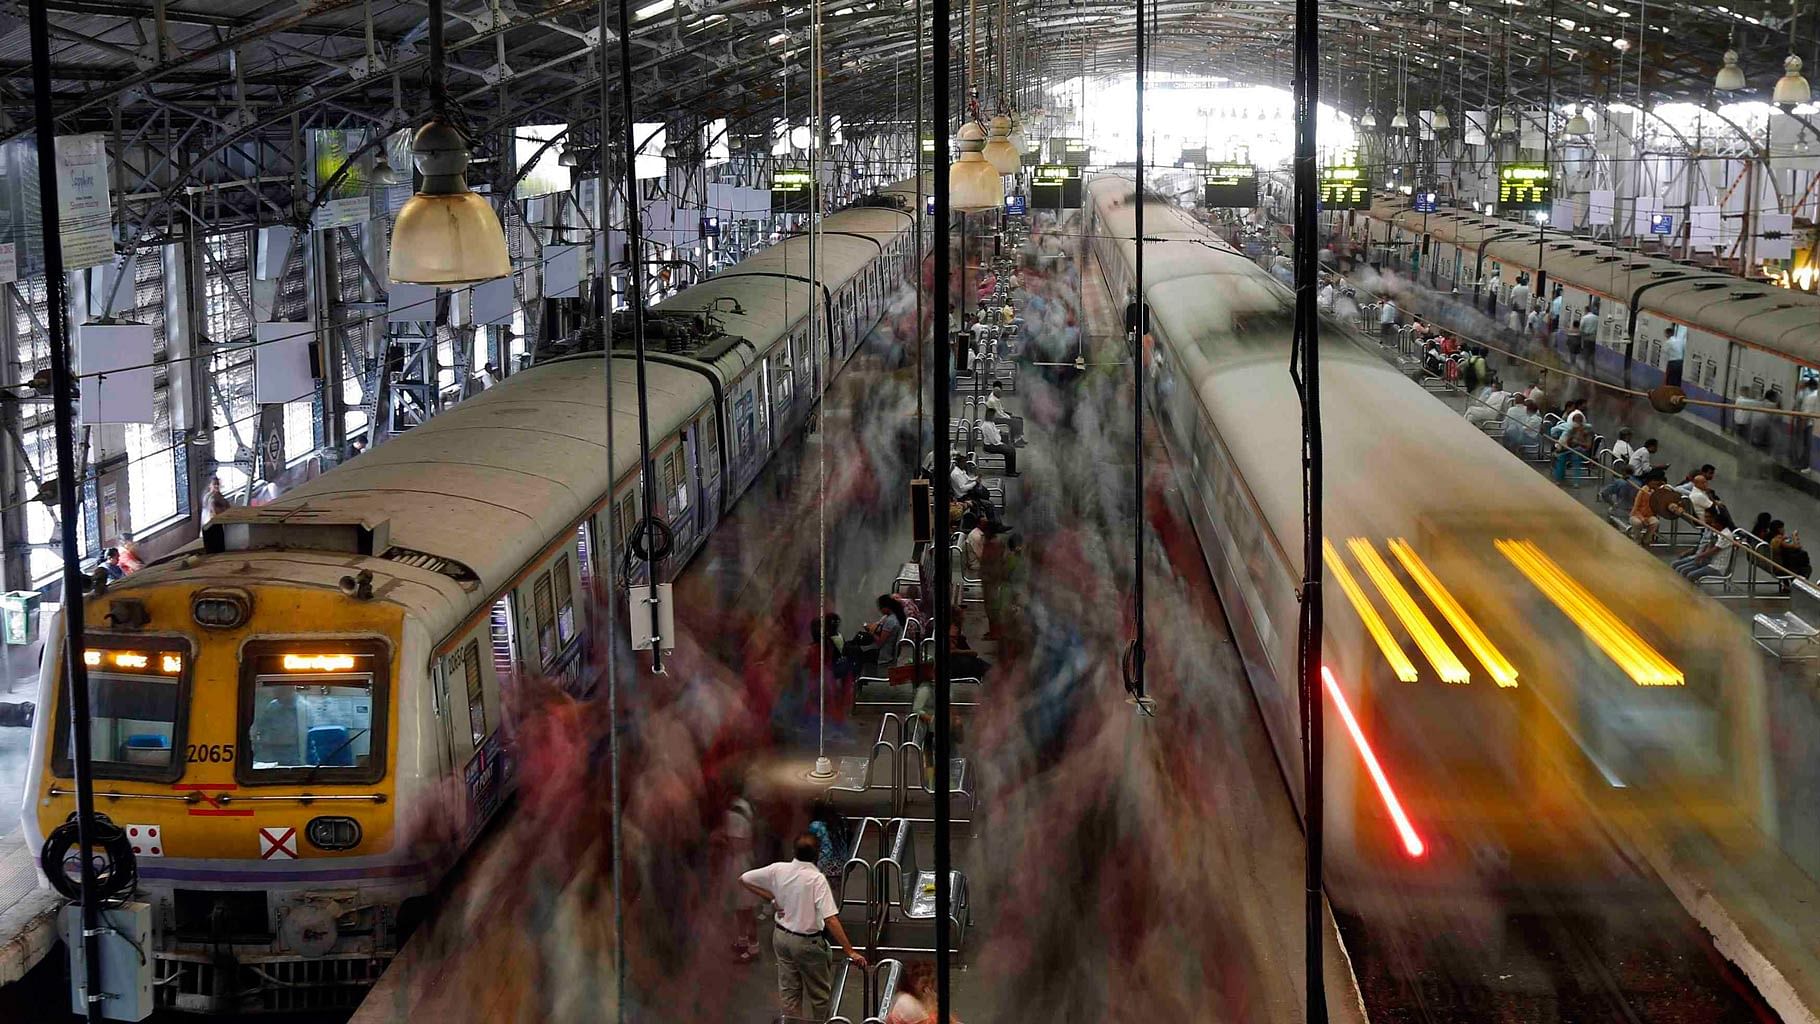 The CST station in Mumbai. (Photo: Reuters)